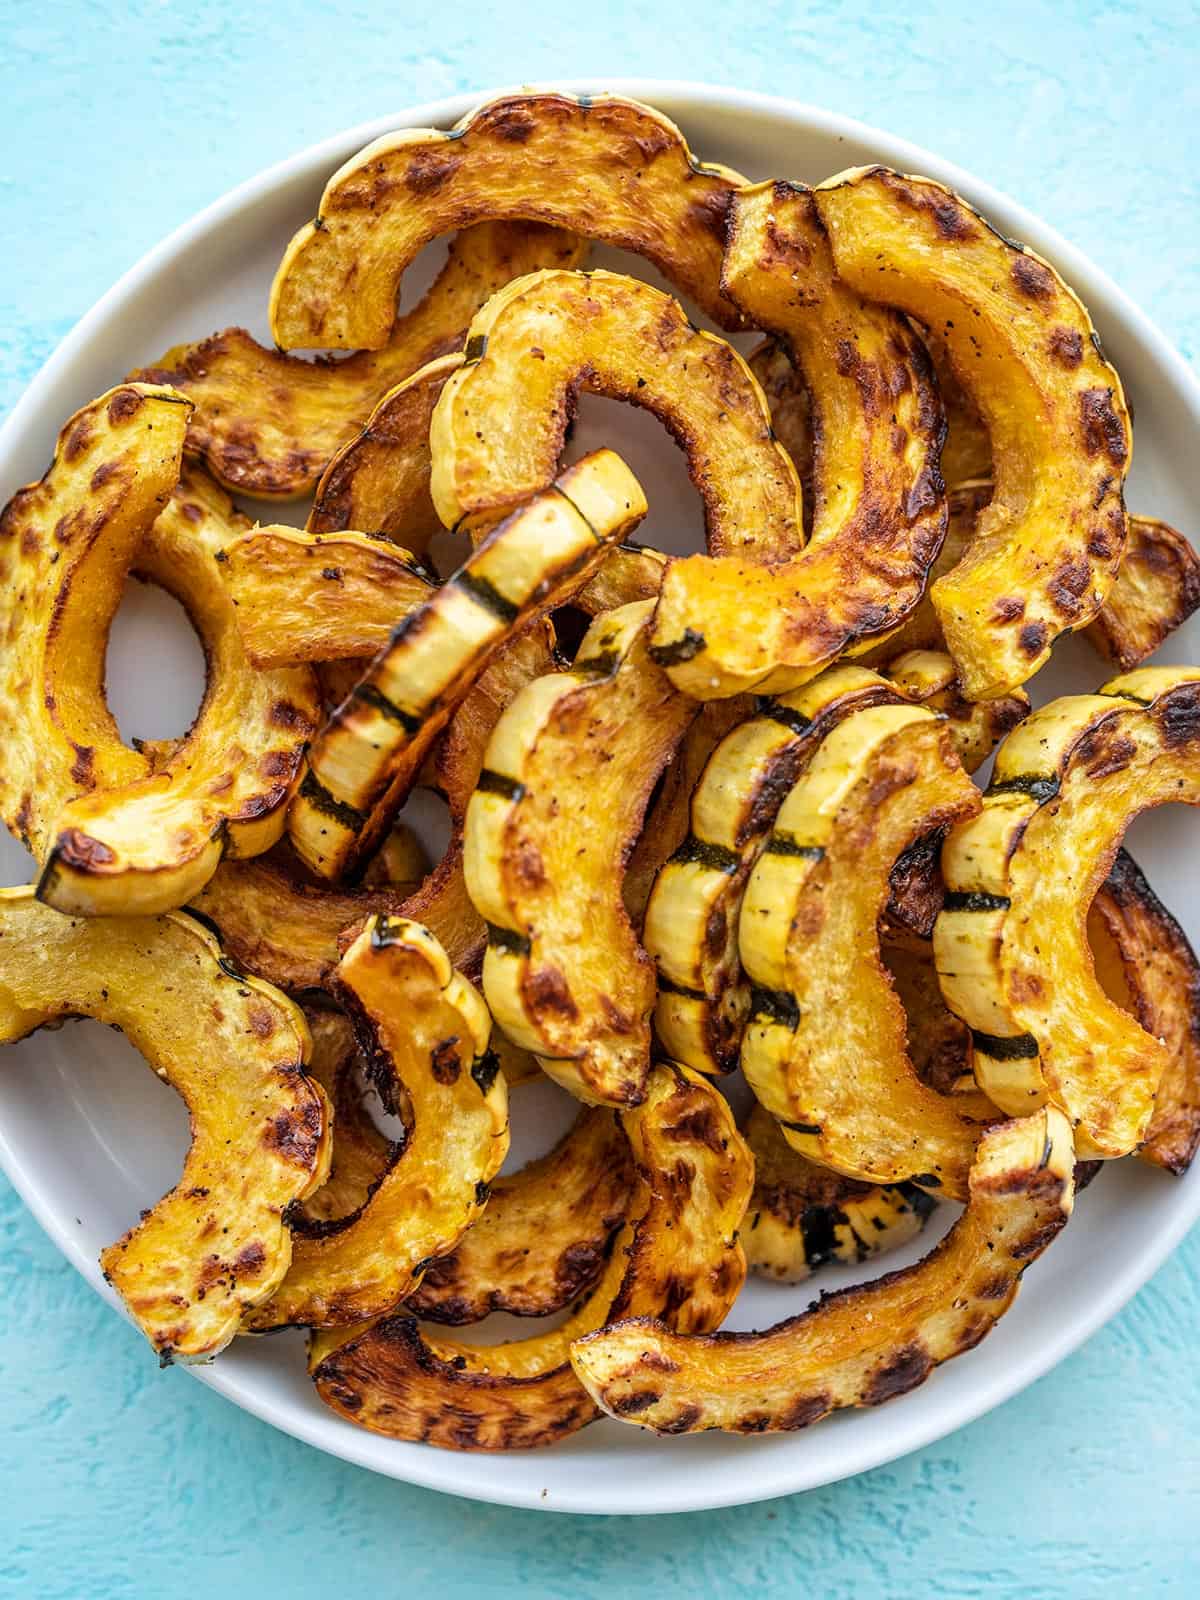 Roasted delicata squash piled onto a plate